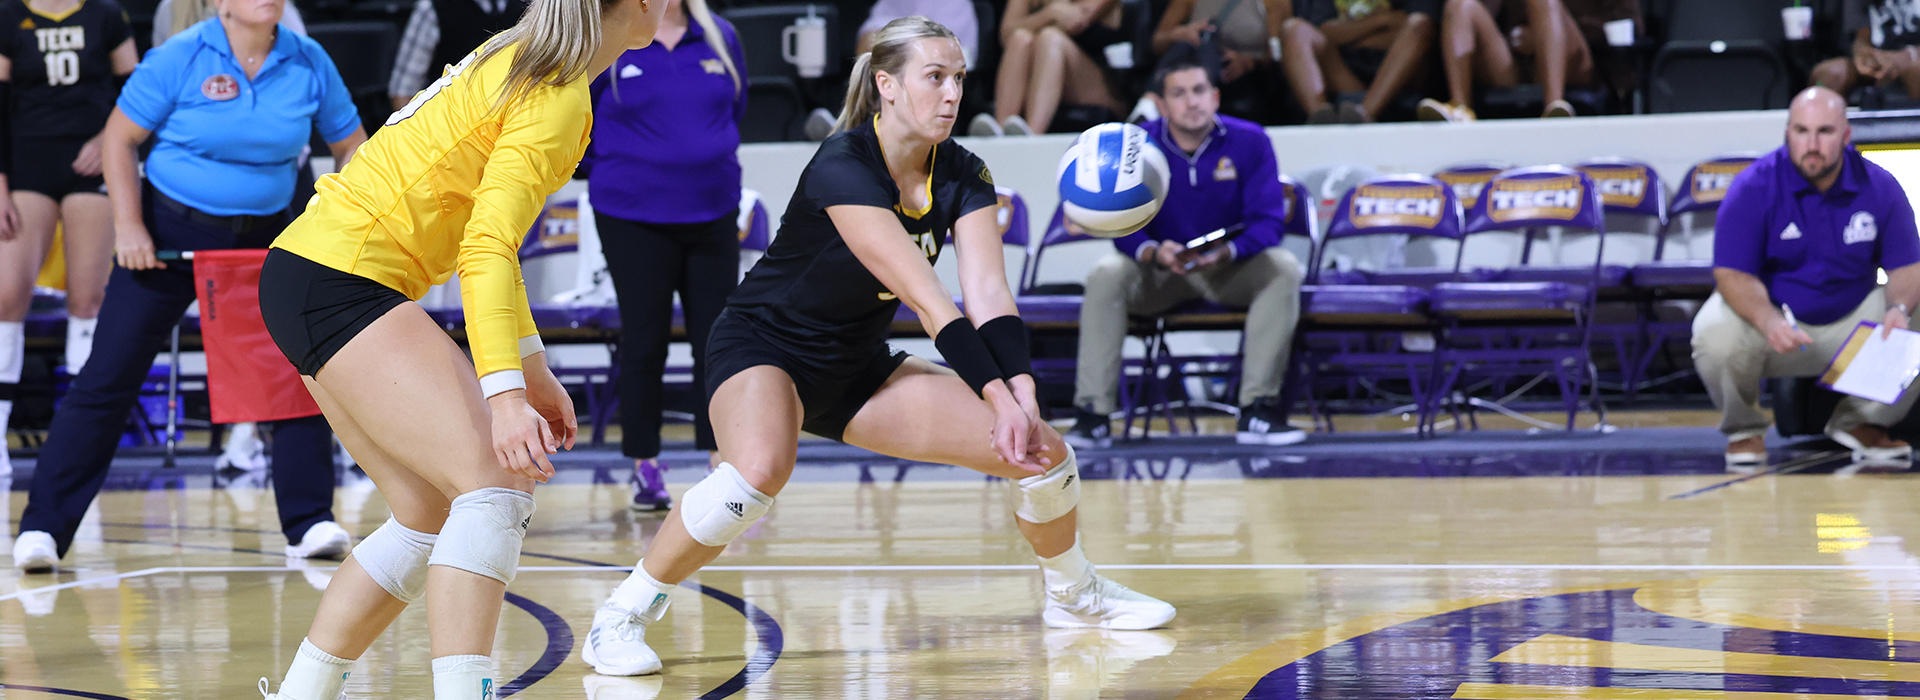 Bearcats outduel Tech in Golden Eagle Invitational presented by Holiday Inn of Cookeville finale